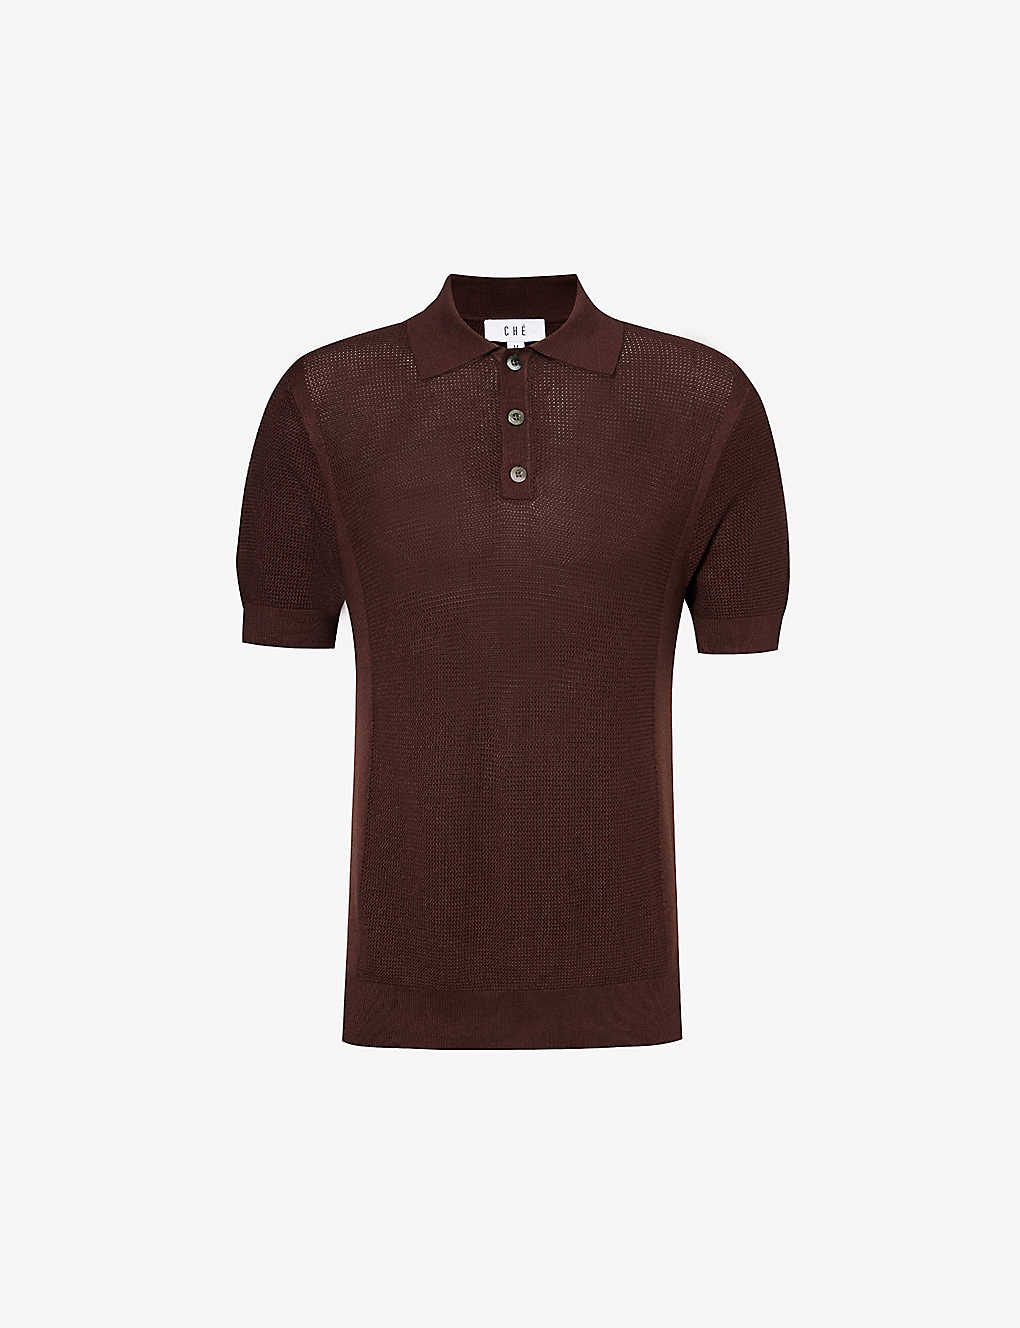 Che Mens Chocolate Brown - 38 Marley Short-sleeved Woven-blend Polo Shirt